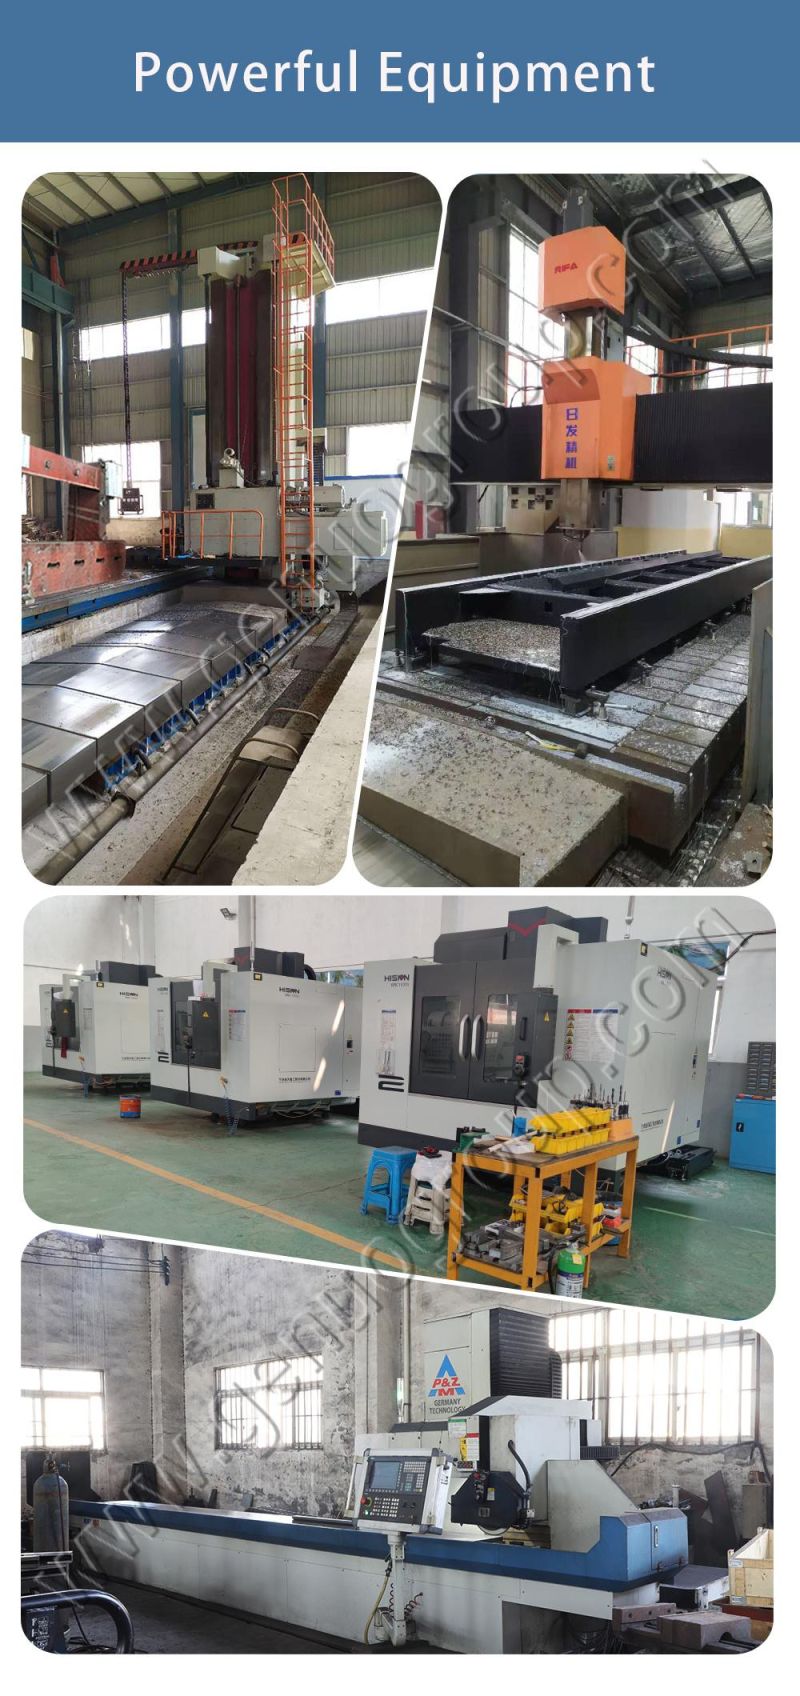 Low Noise Bending Machine for Stainless Steel Metal Plate